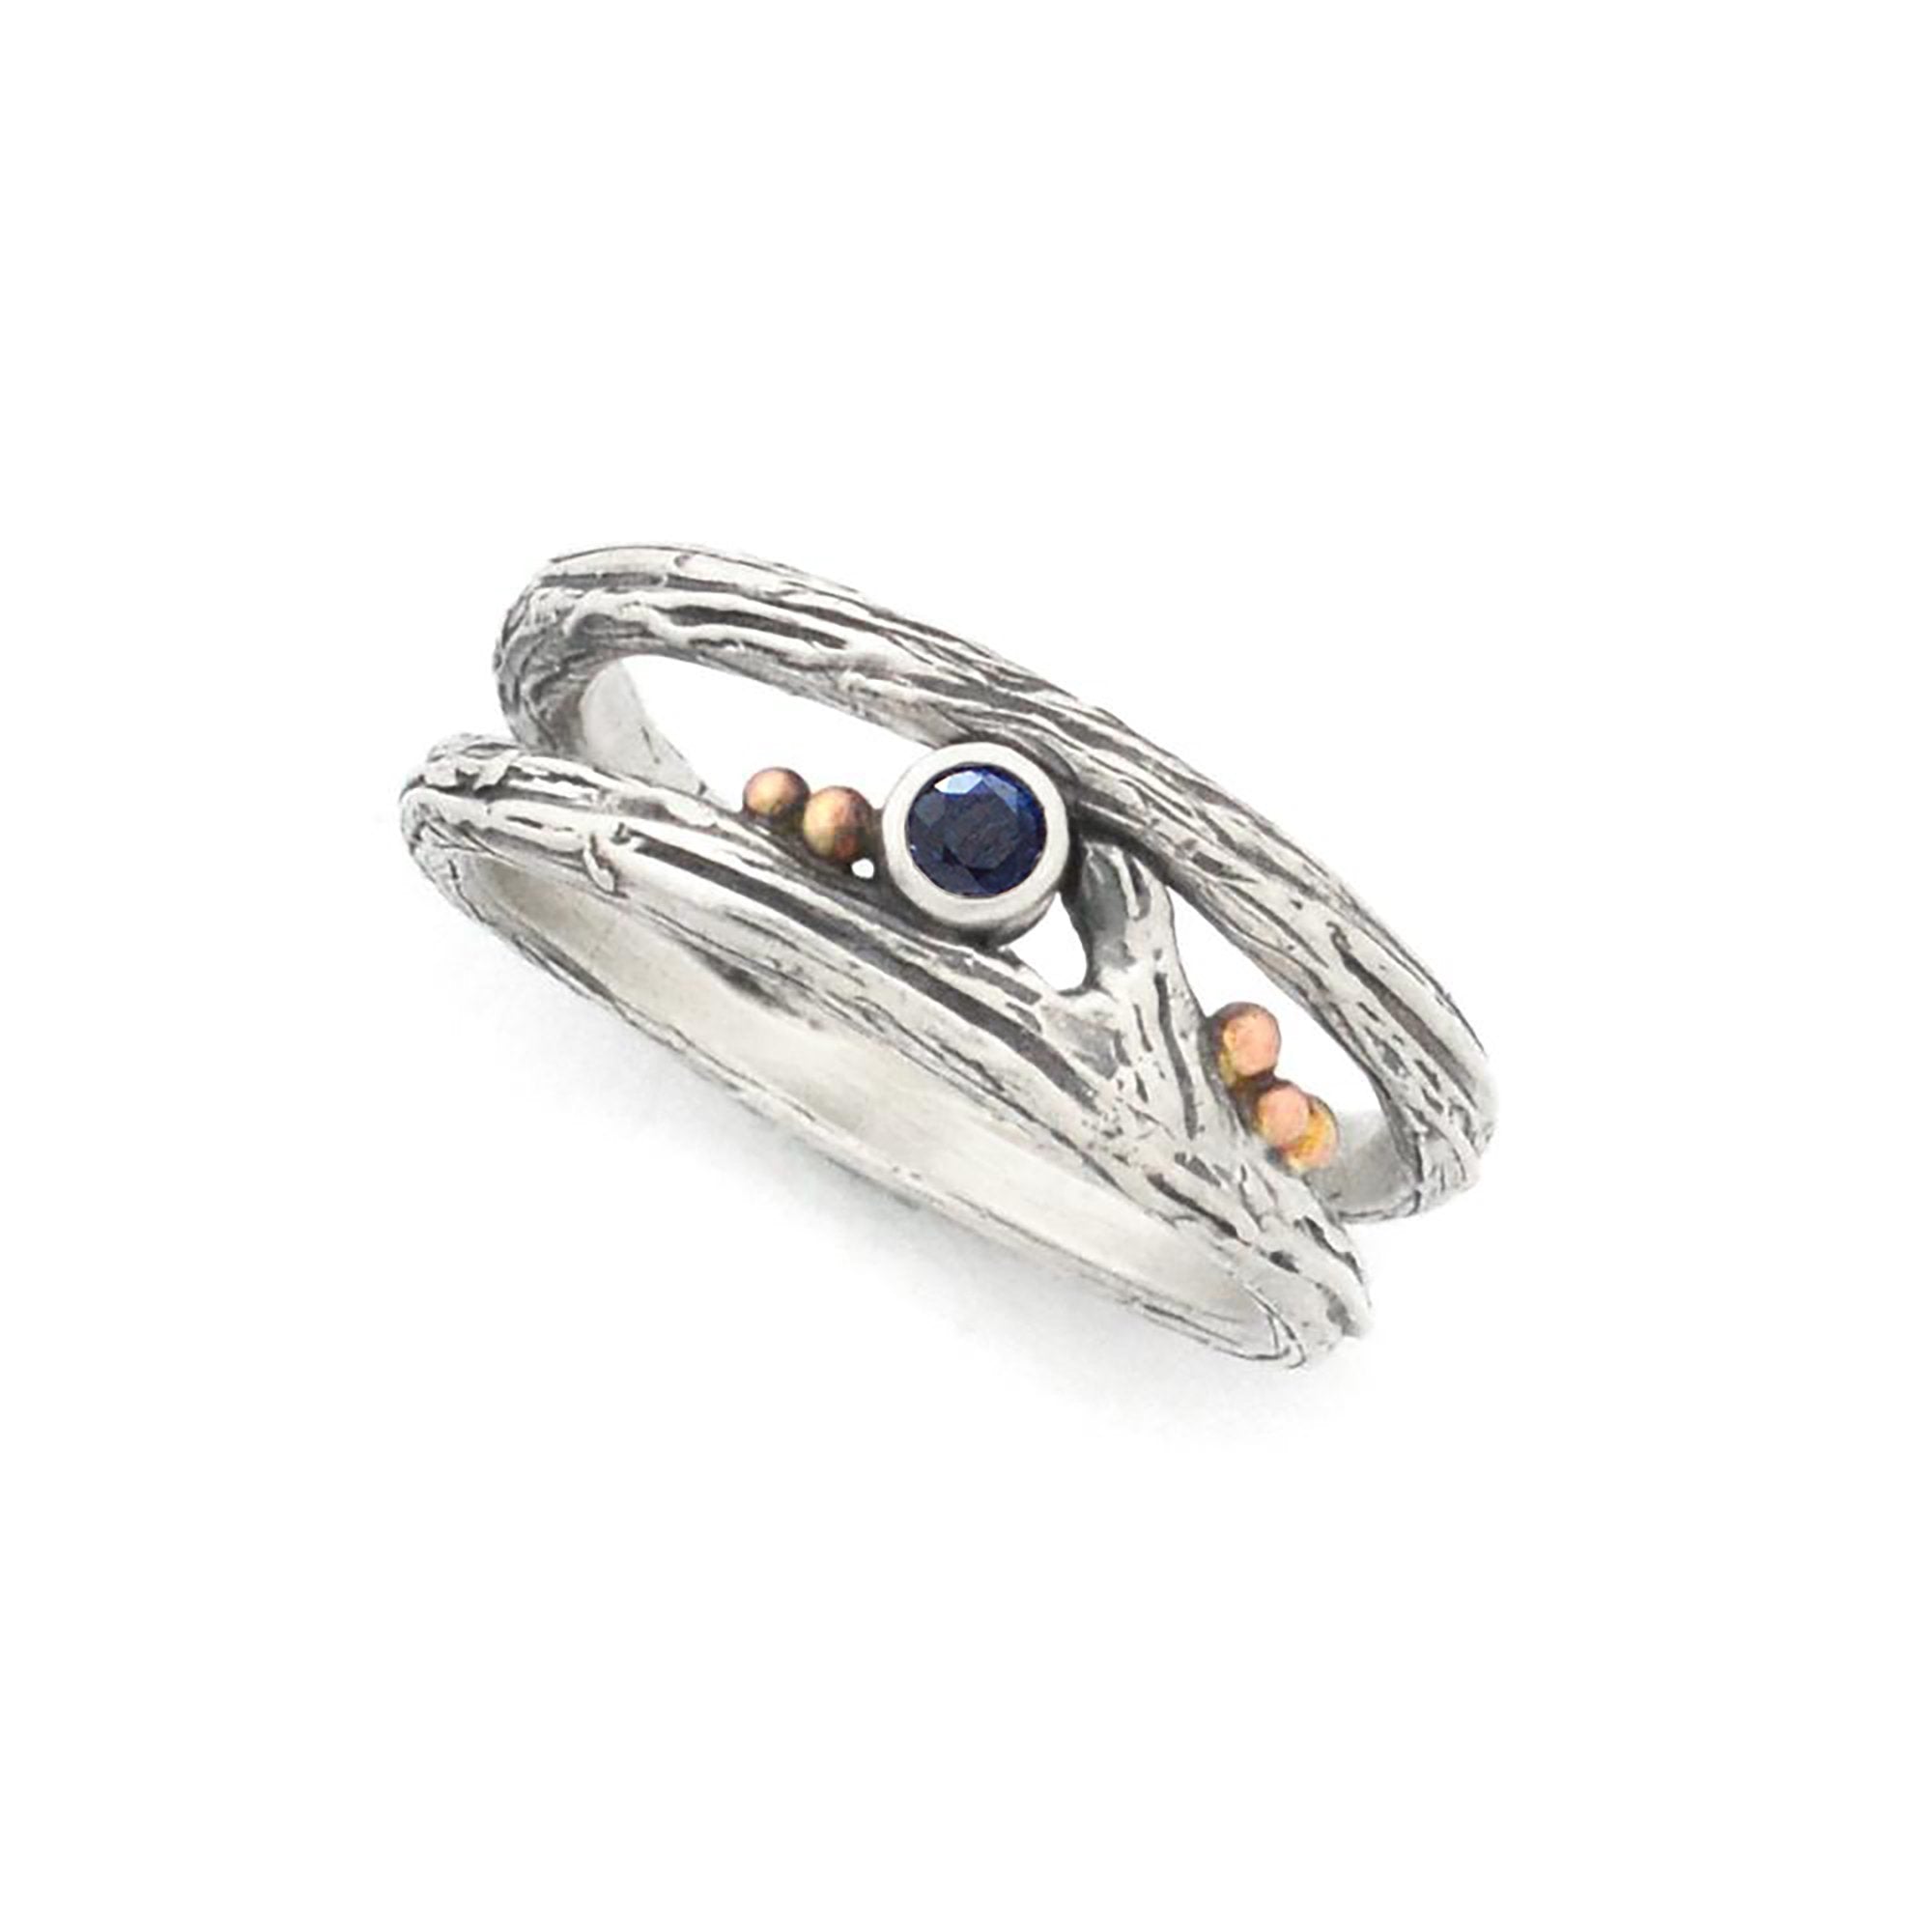 Silver Frosted Diamond and Roses Twig Ring - your choice of stone - Wedding Ring Recycled Diamond Blue Sapphire 3617 - handmade by Beth Millner Jewelry